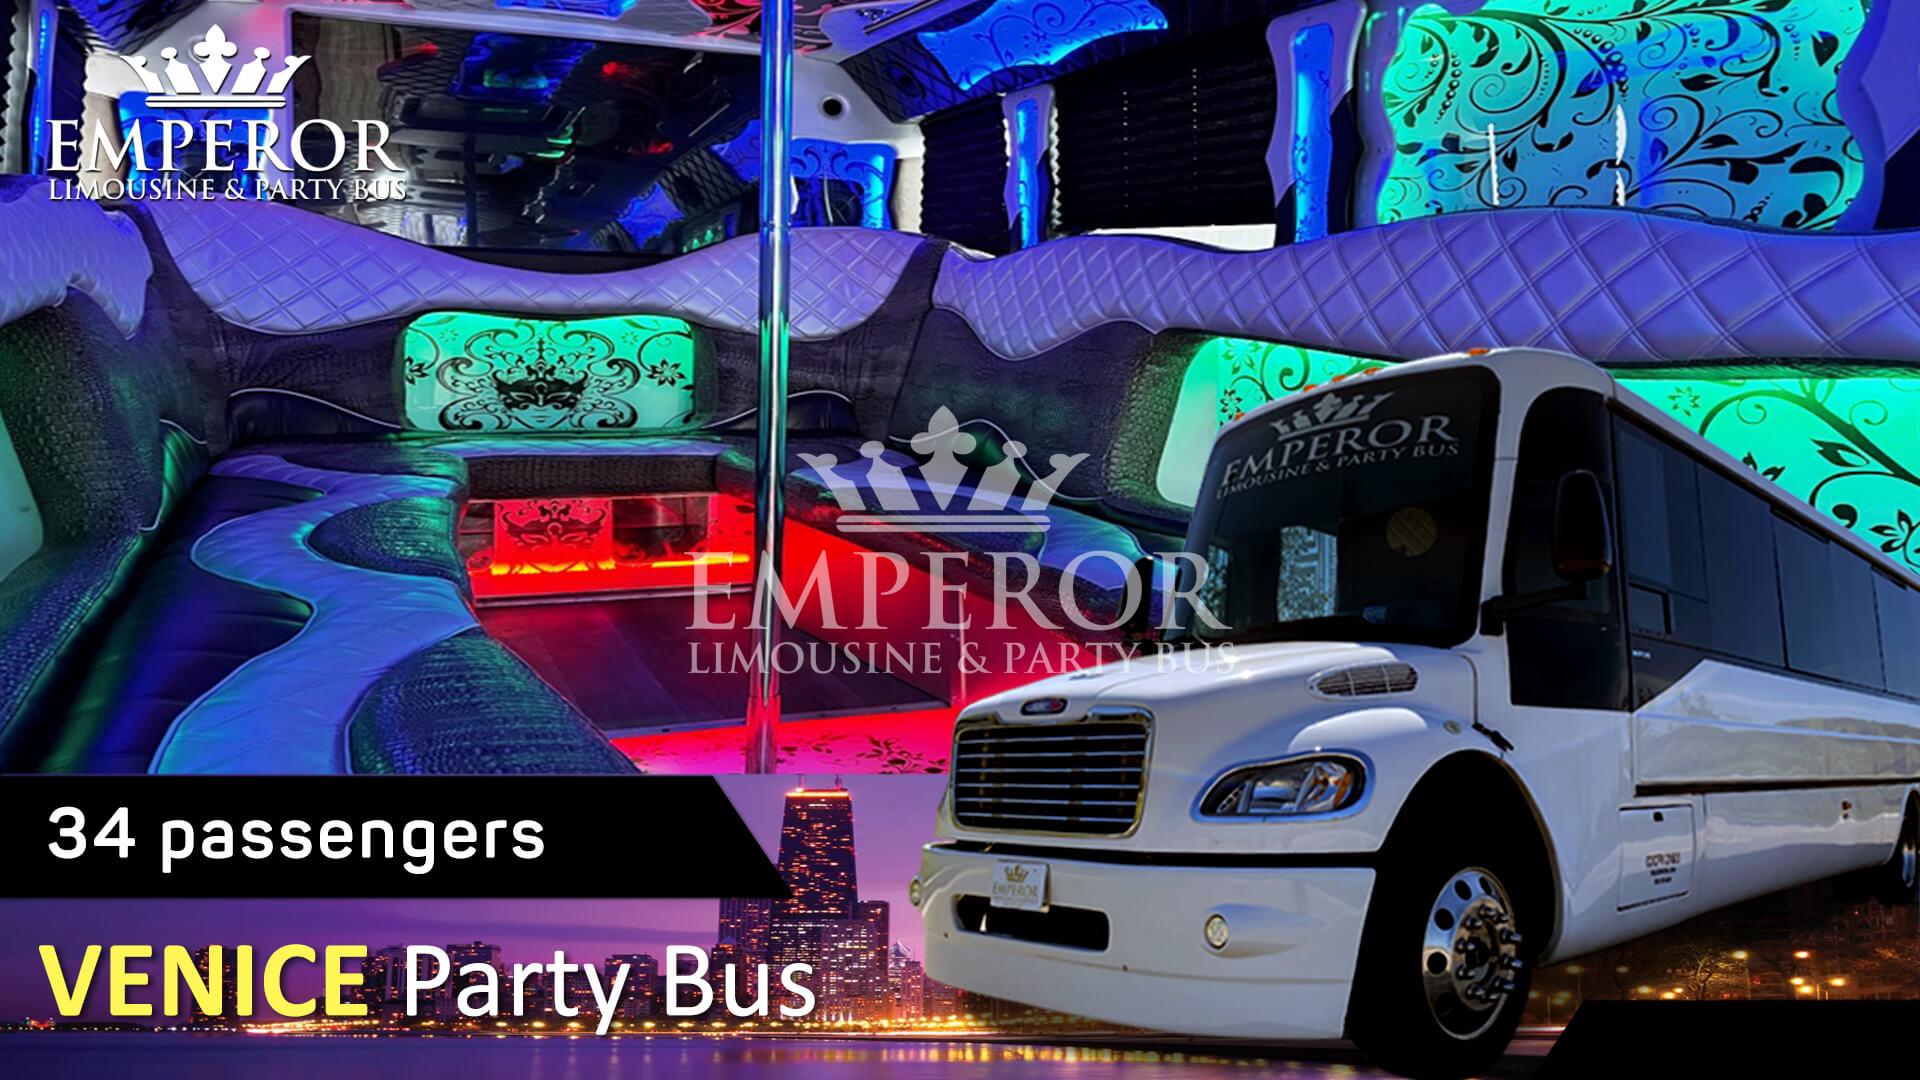 Best party buses for Bachelor party in Chicago - Venice Edition